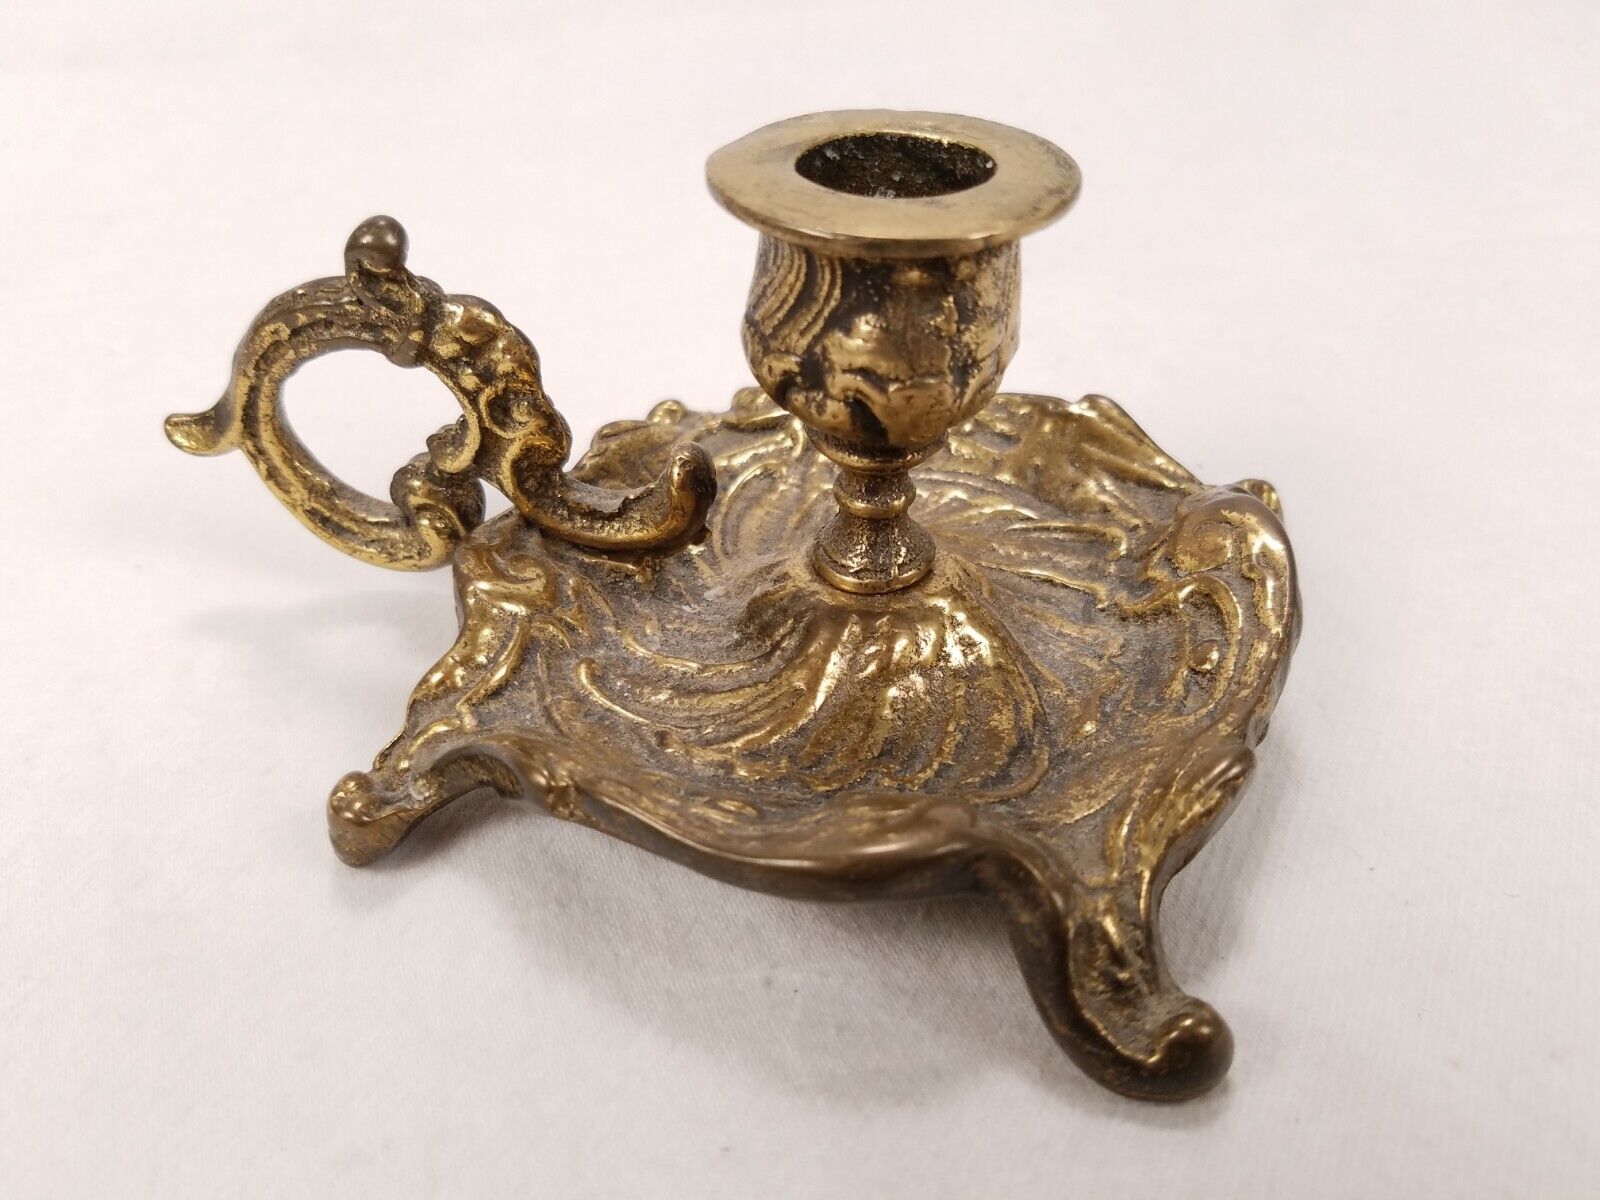 Victorian Brass Chamber Candle Holder, Antique George Johnson Art Nouveau Candle